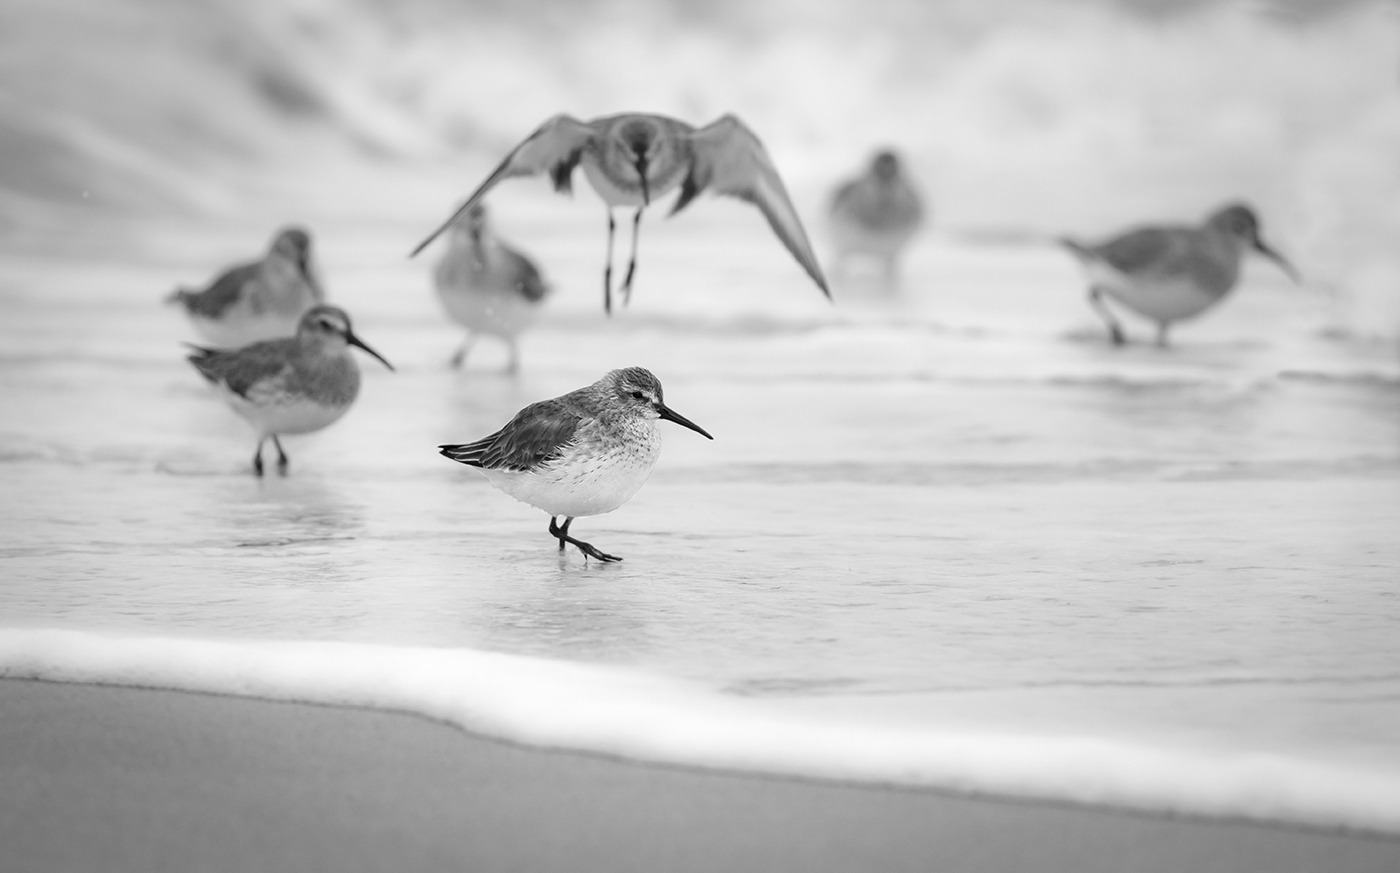 2nd PrizeOpen Mono In Class 3 By Dan Laughman For The Dunlins OCT-2020.jpg